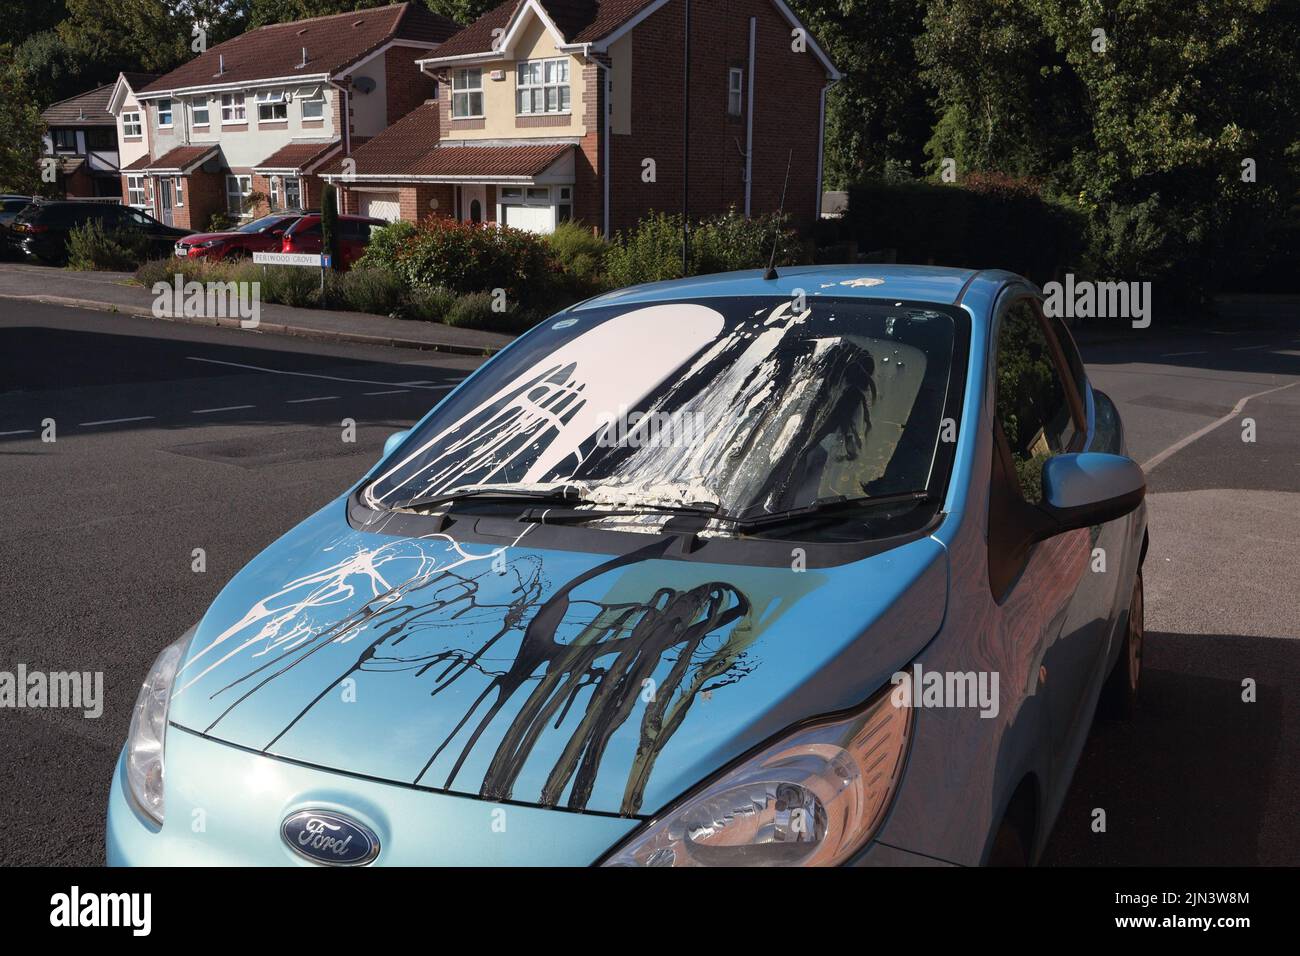 Car vandalised with paint thrown all over the windscreen and bonnet damaged. In England. A vandalised car vehicle Stock Photo